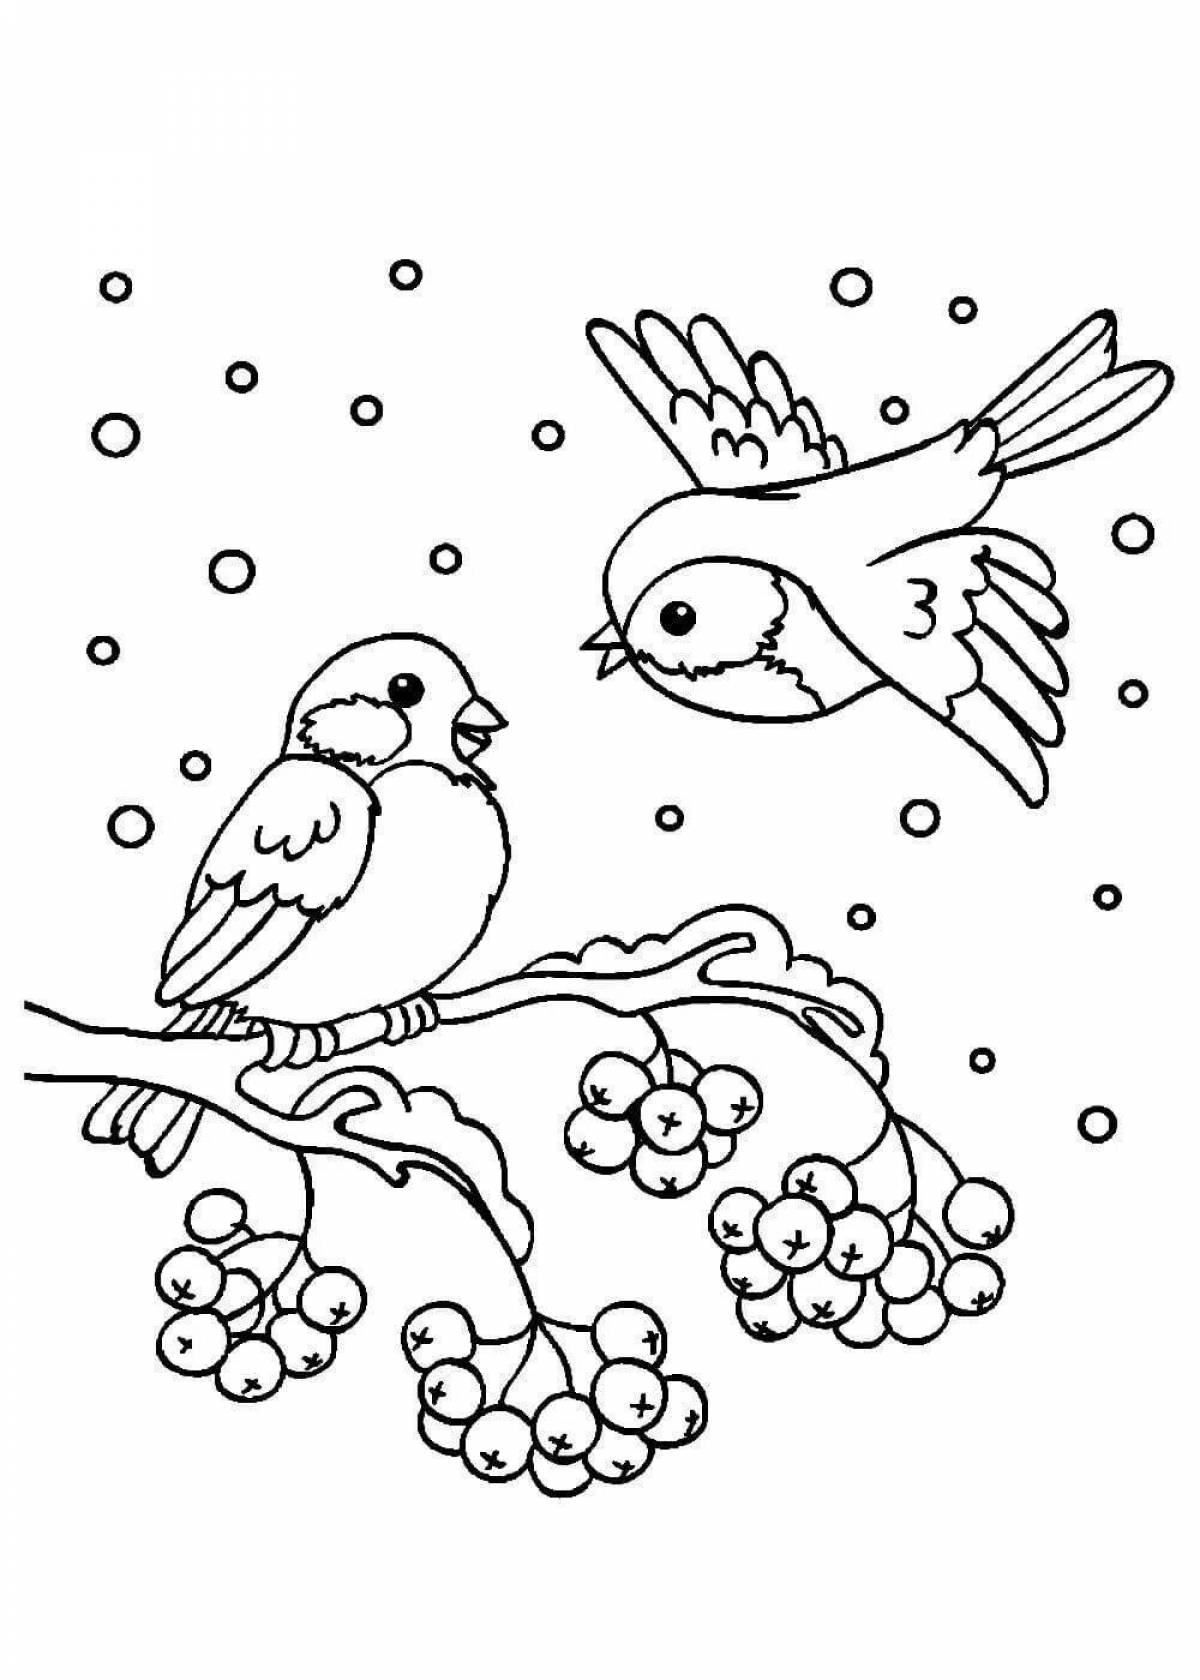 Exquisite coloring of wintering birds for children 2-3 years old